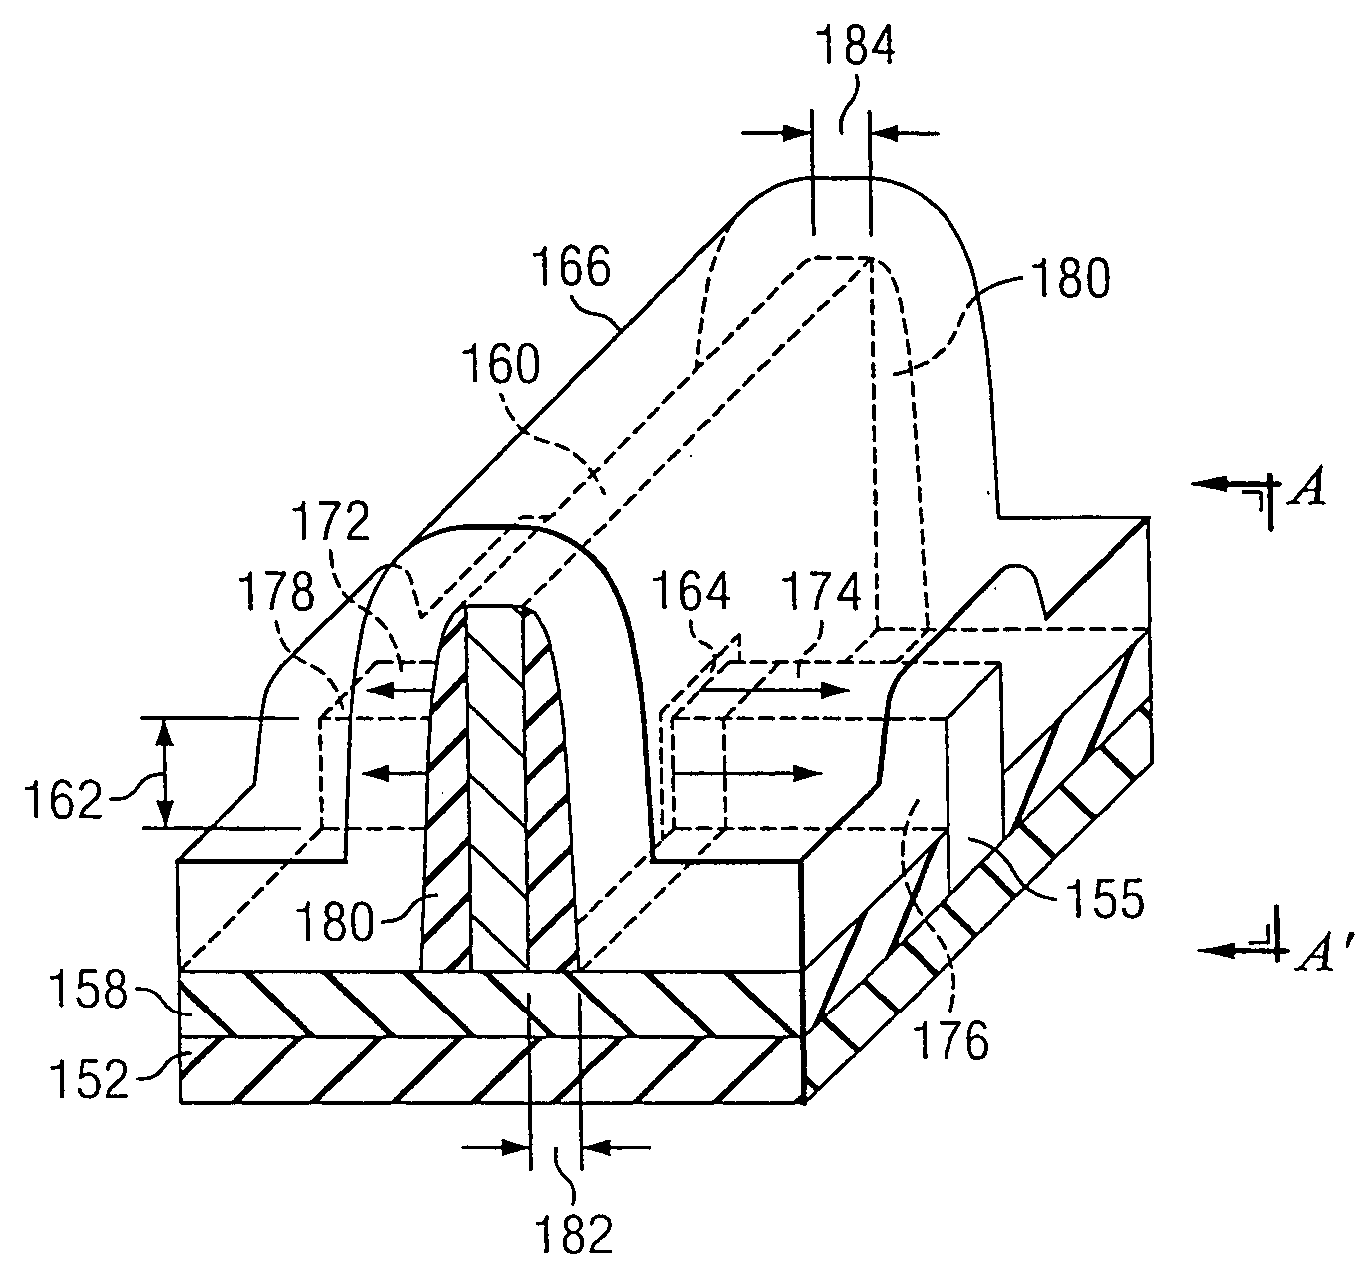 Semiconductor-on-insulator chip incorporating strained-channel partially-depleted, fully-depleted, and multiple-gate transistors